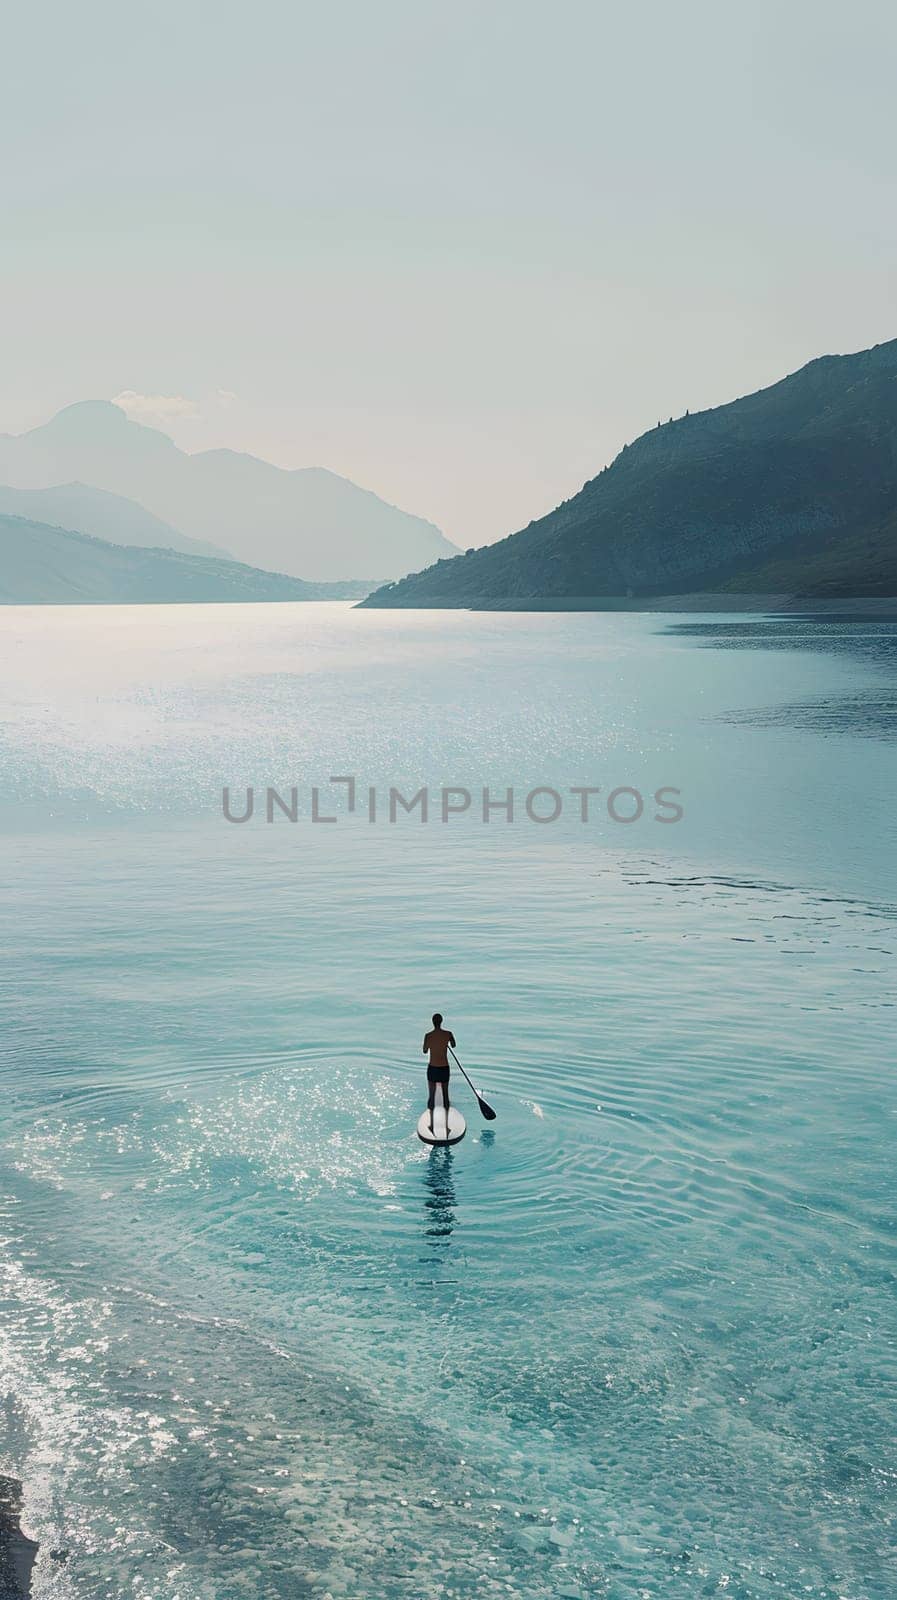 Man paddles on board in ocean under sunny sky, enjoying water recreation by Nadtochiy